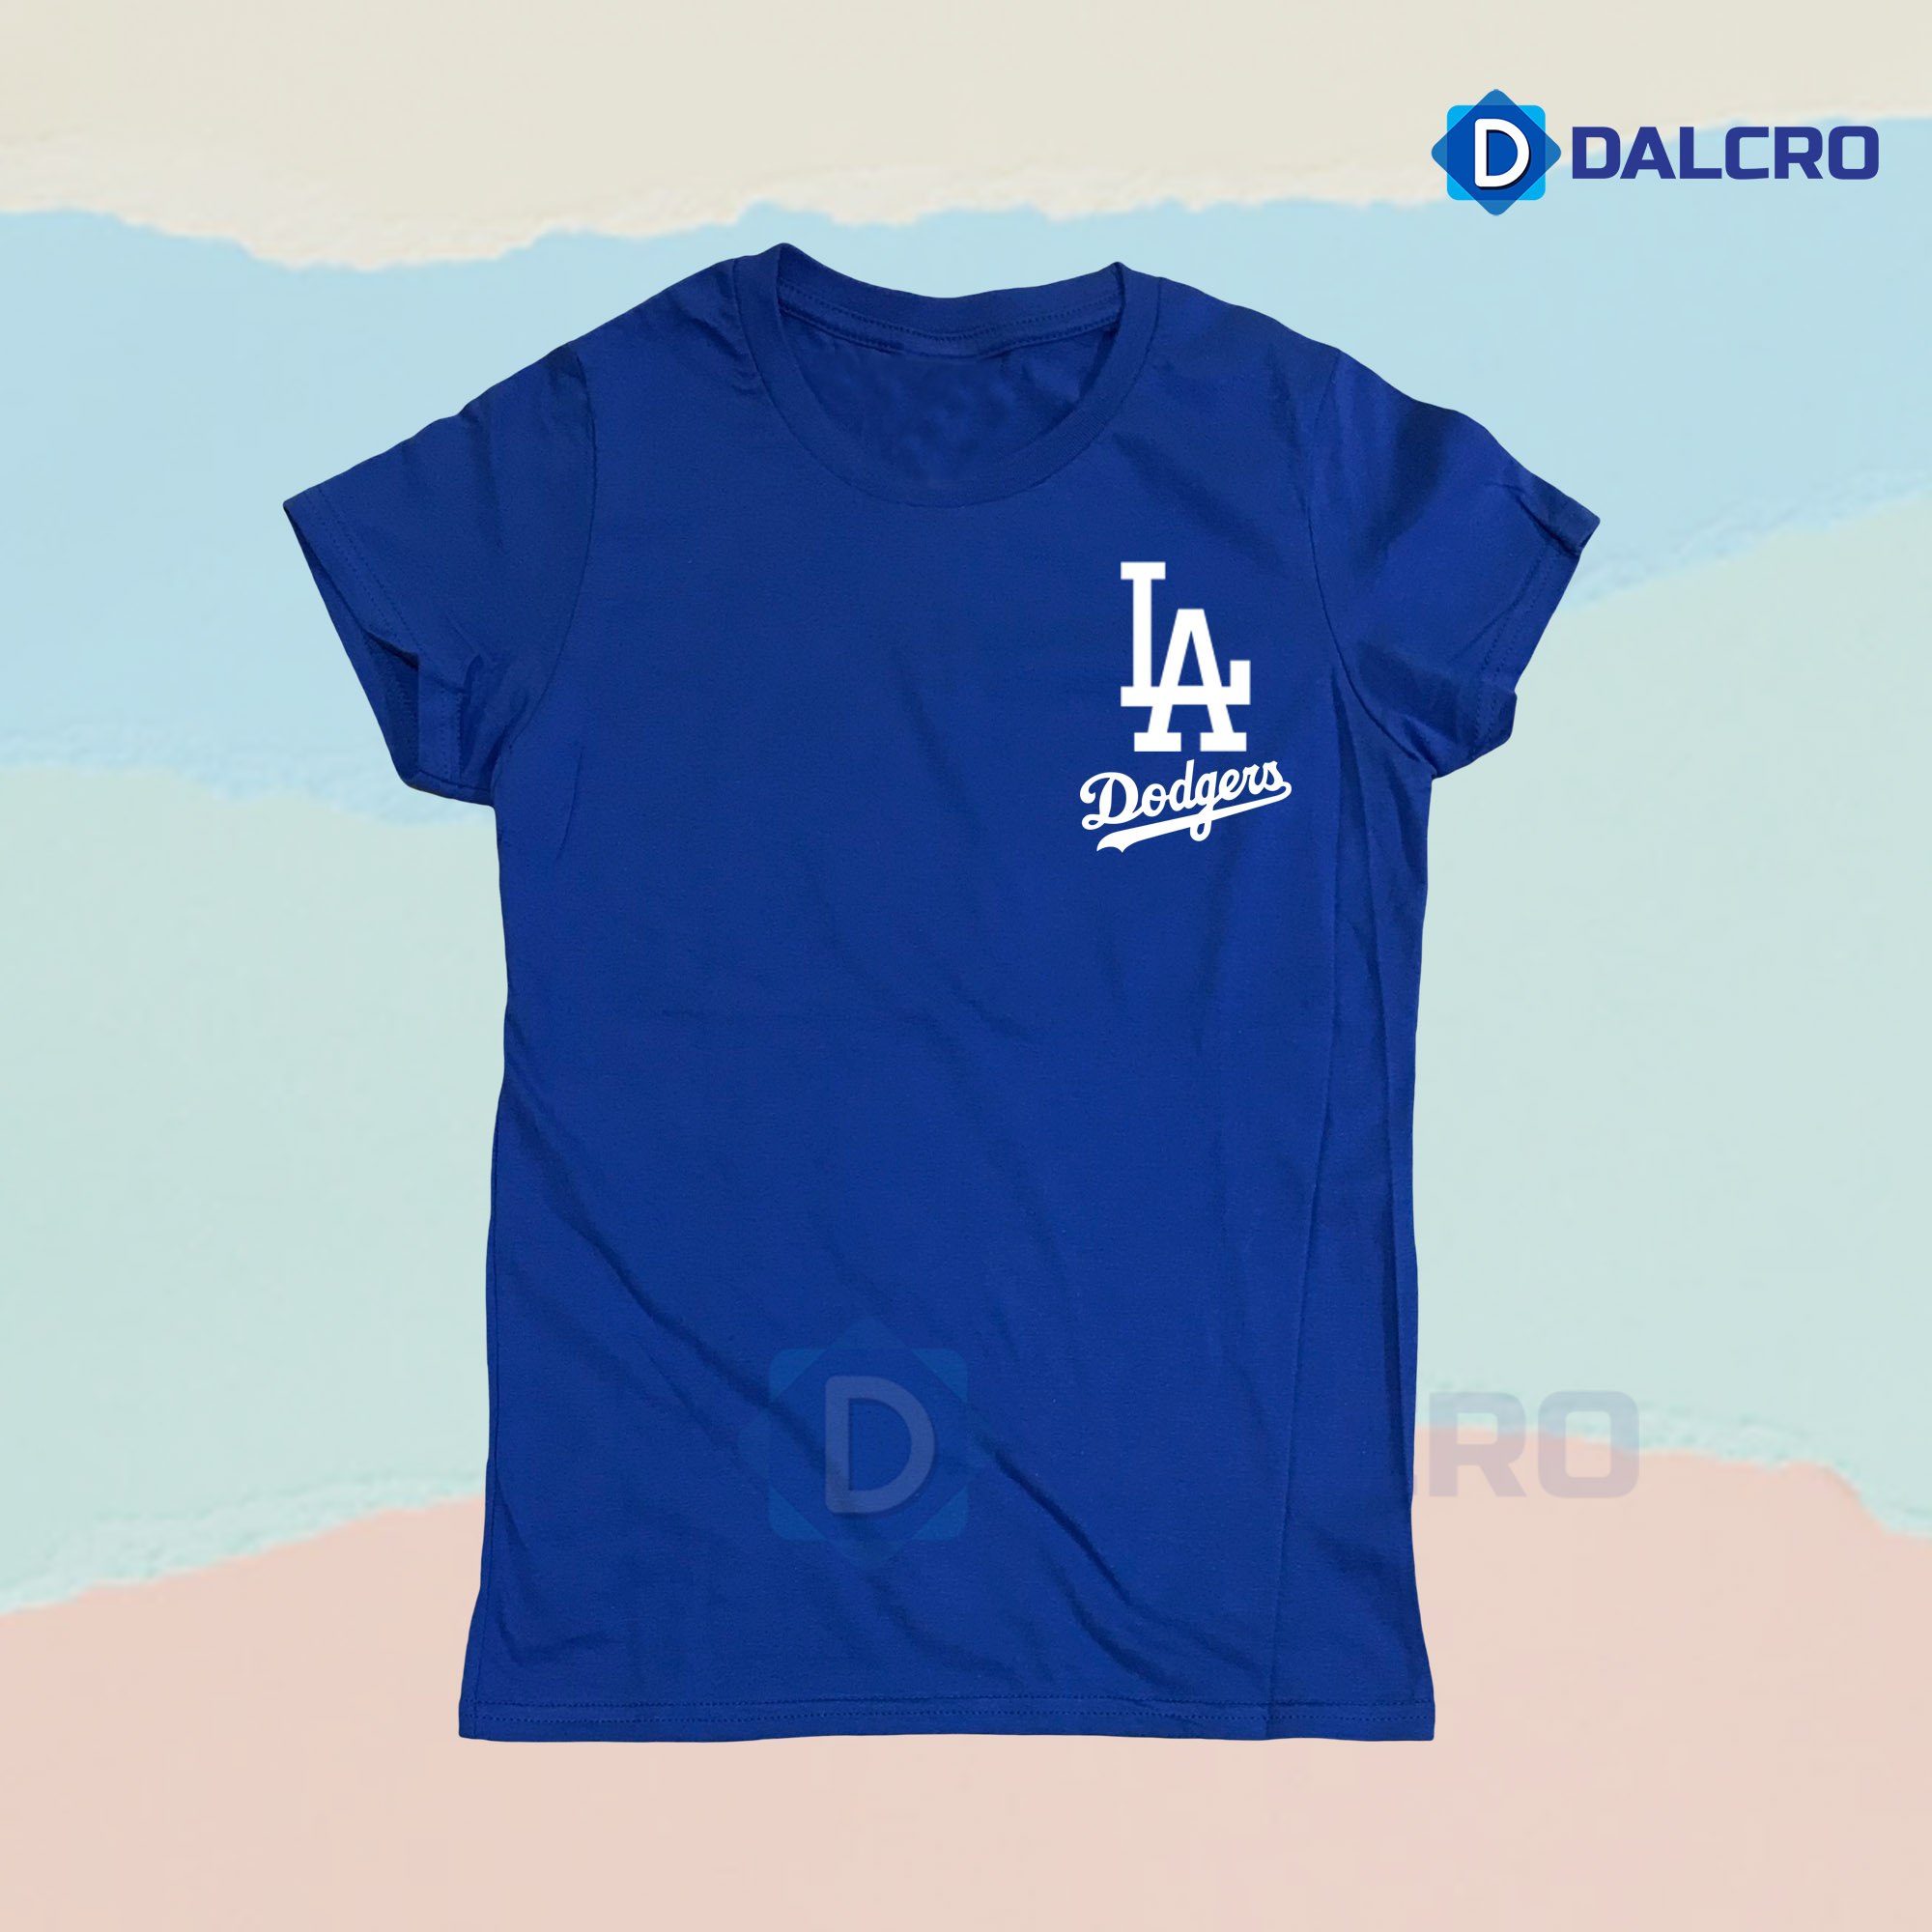 dodgers t shirts for sale